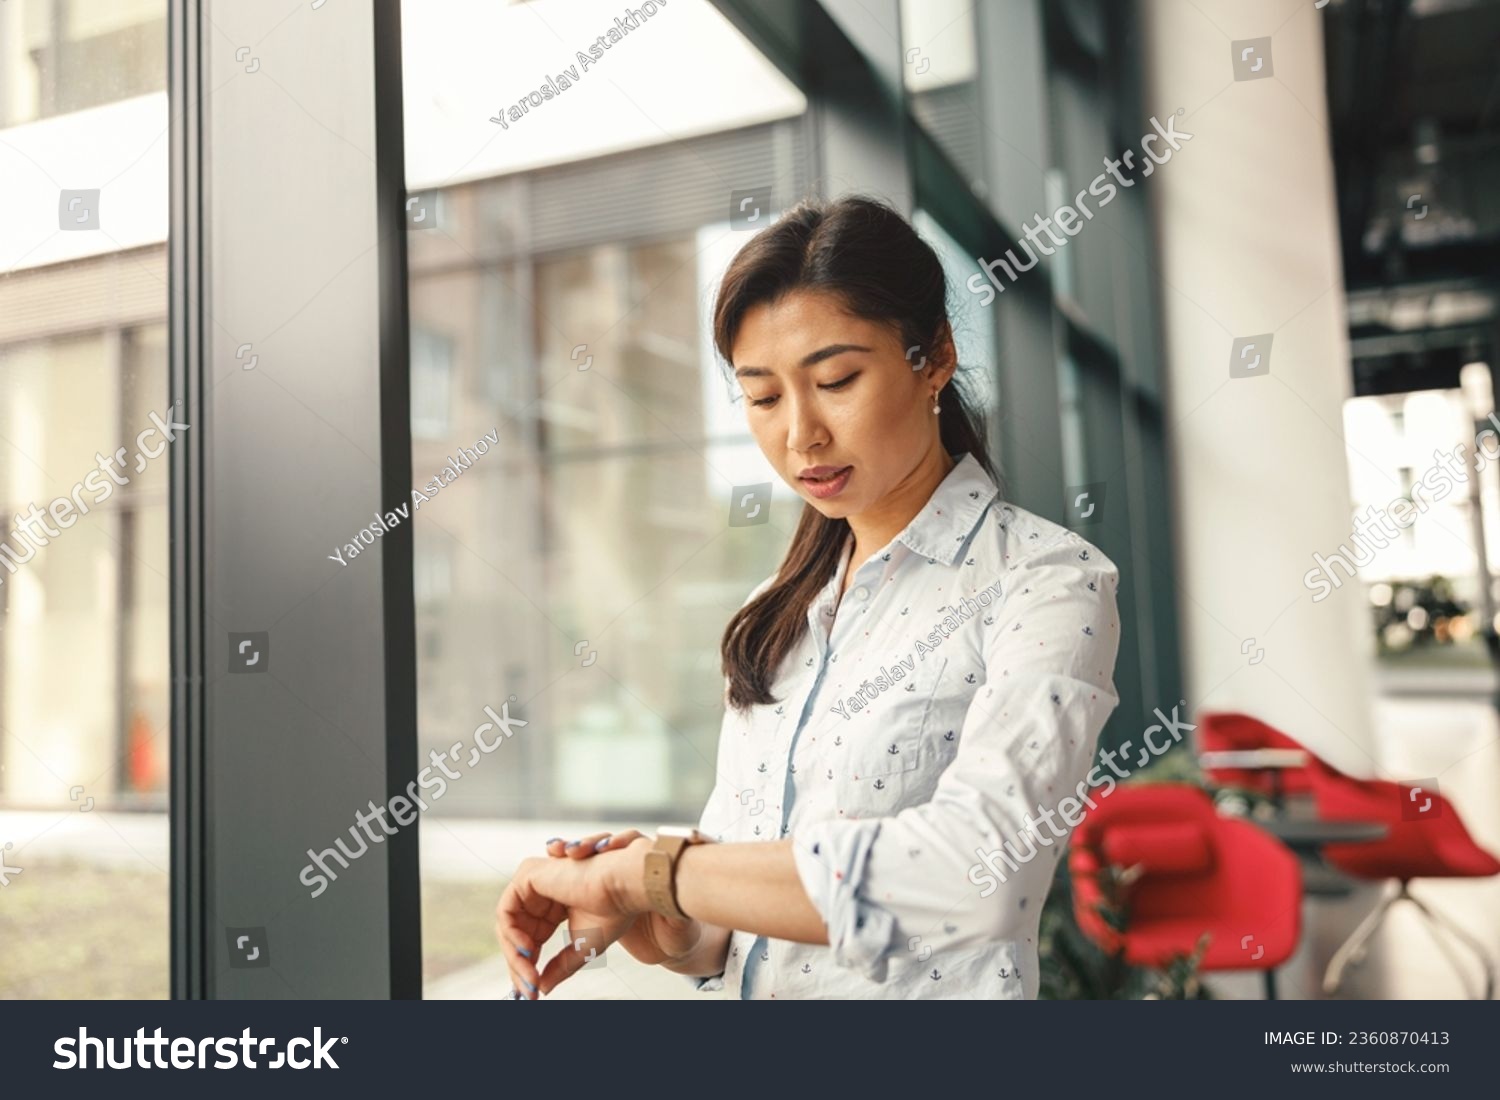 Businesswoman looking on her wrist watch while standing near office window. High quality photo #2360870413